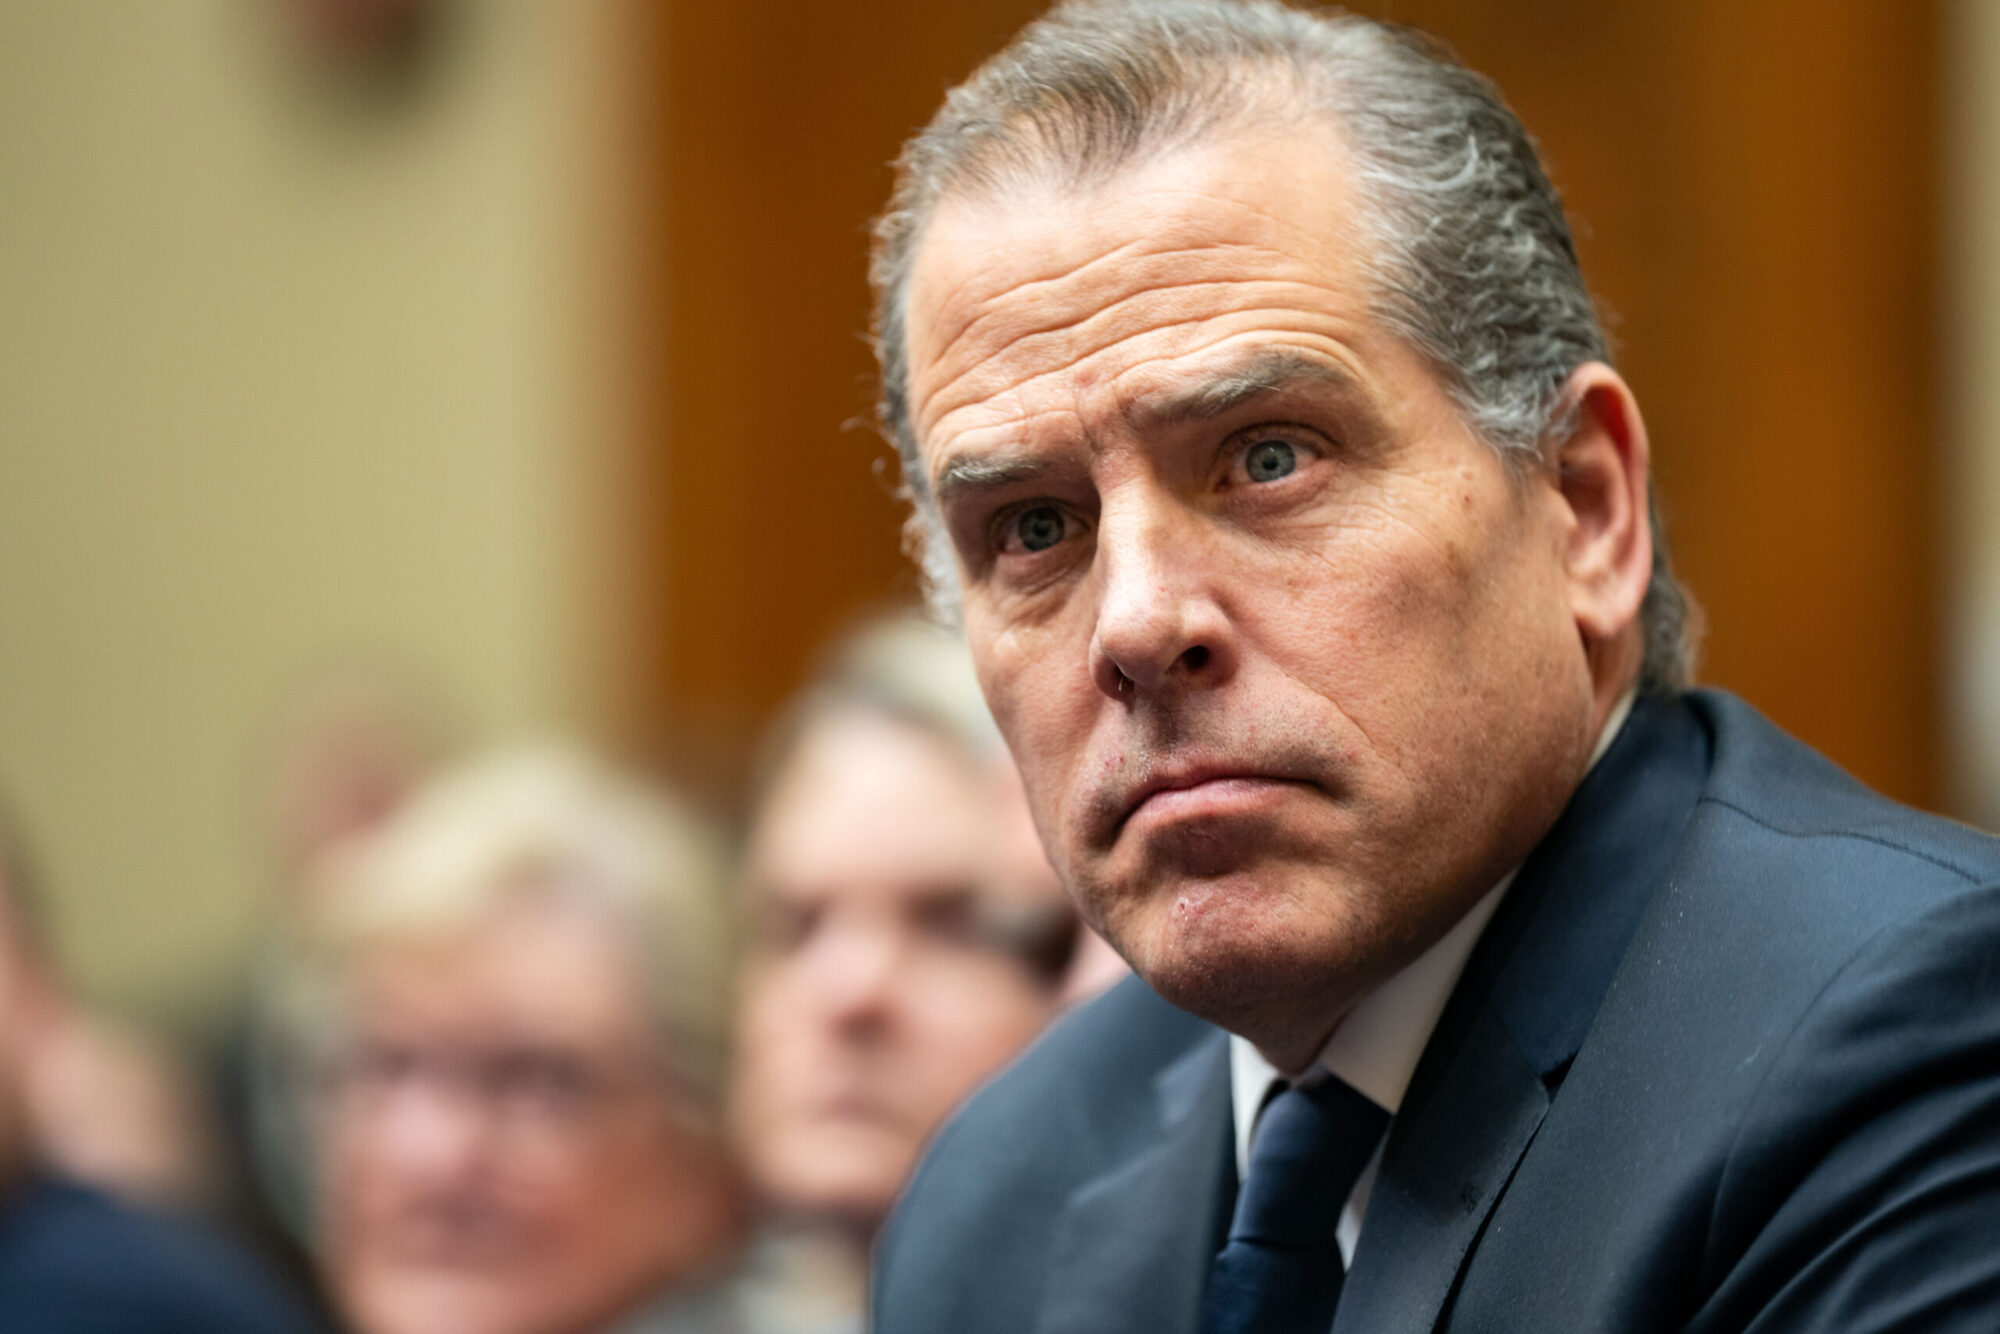 gop committees ‘welcome’ hunter biden’s ‘new willingness’ to testify after snub